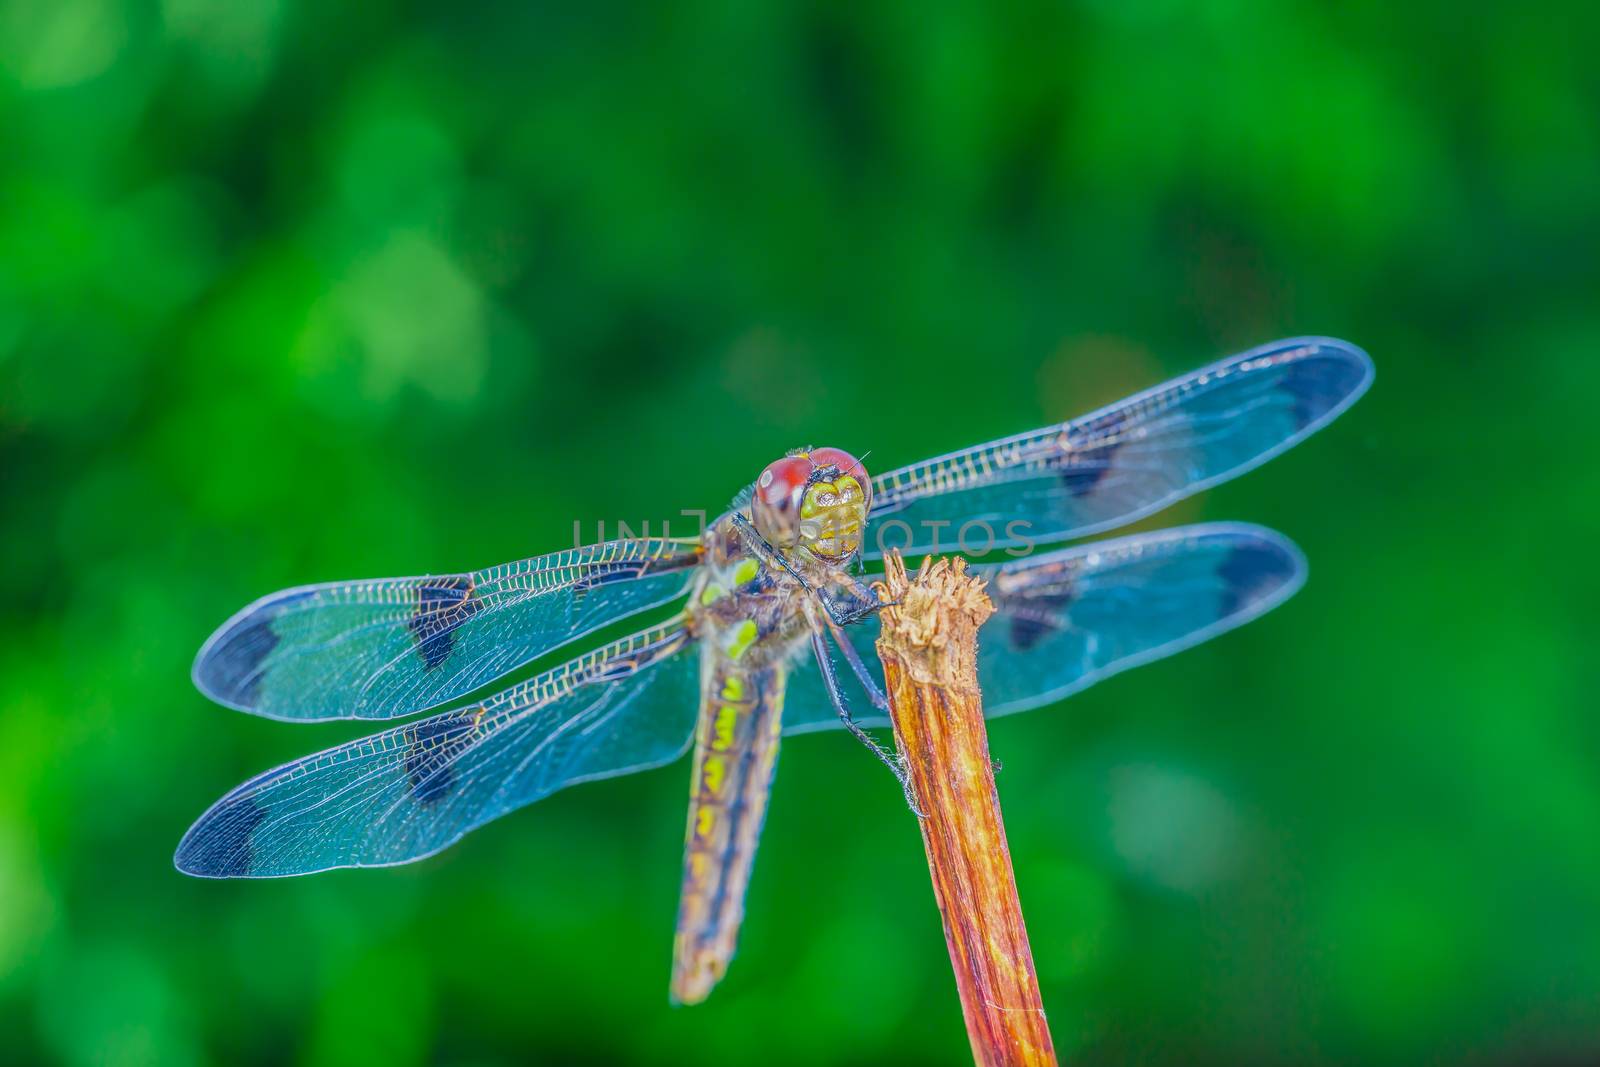 An amazing dragonfly by petkolophoto